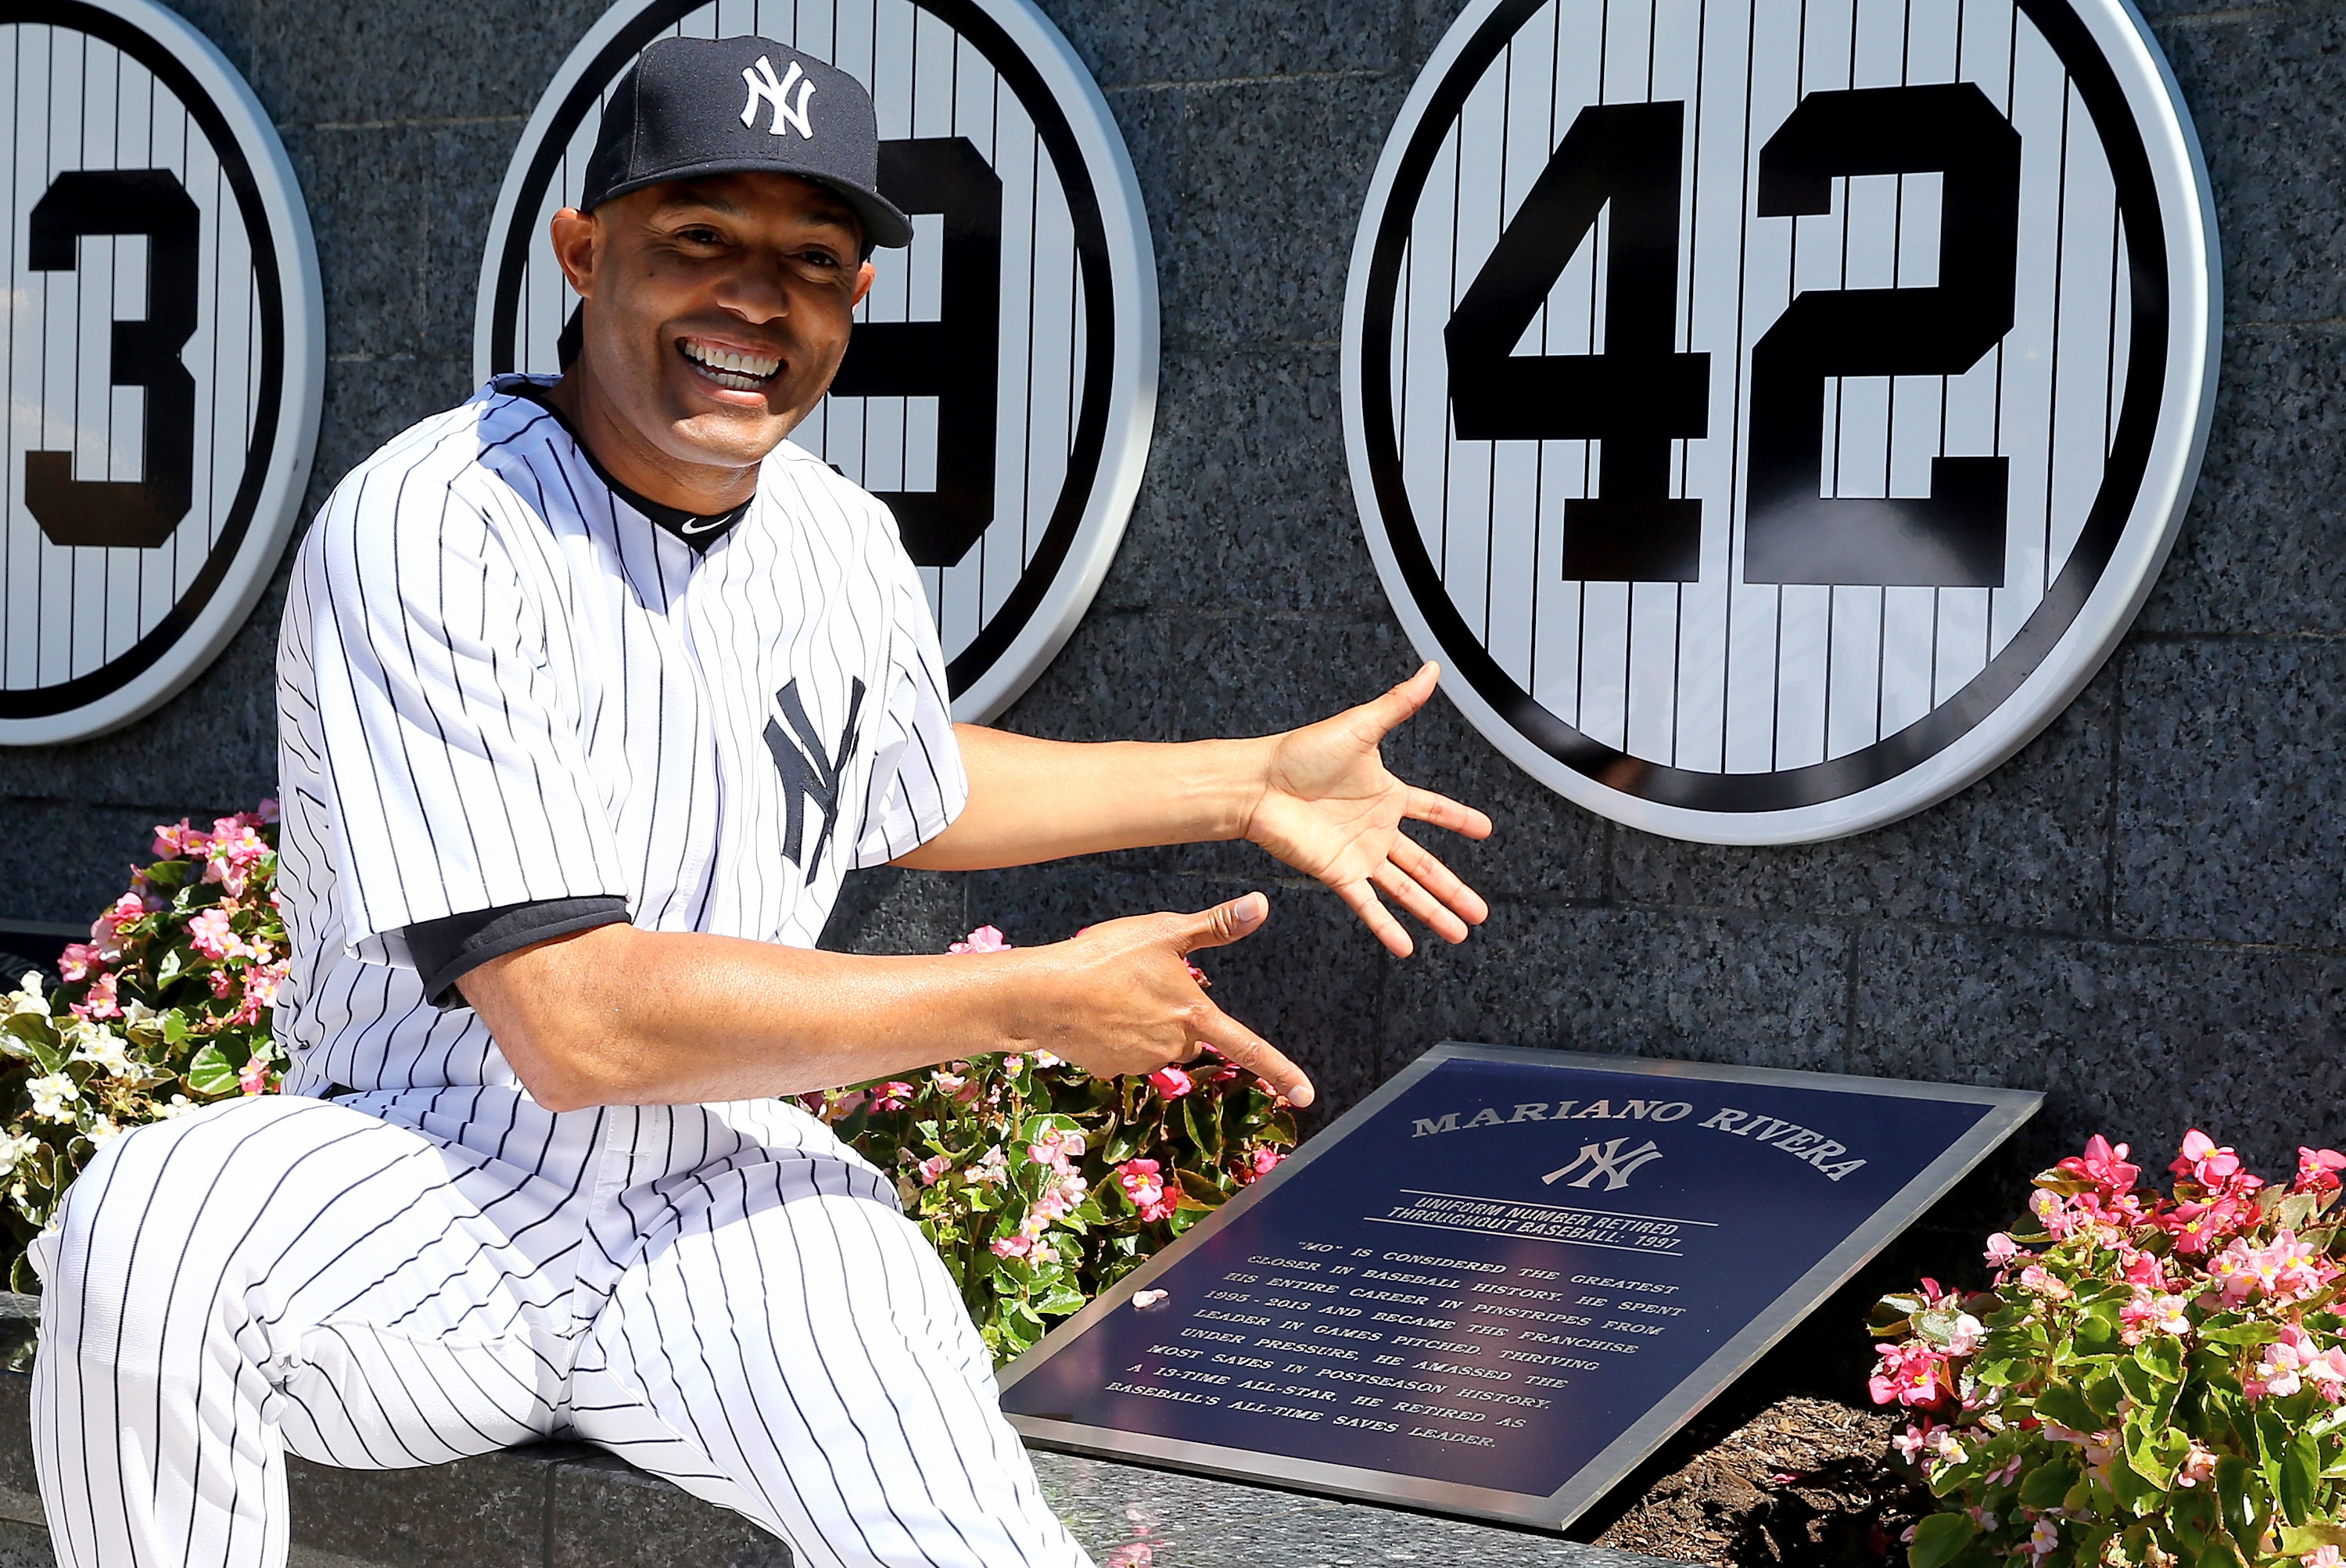 Top moments from O'Neill's time as a Yankee 